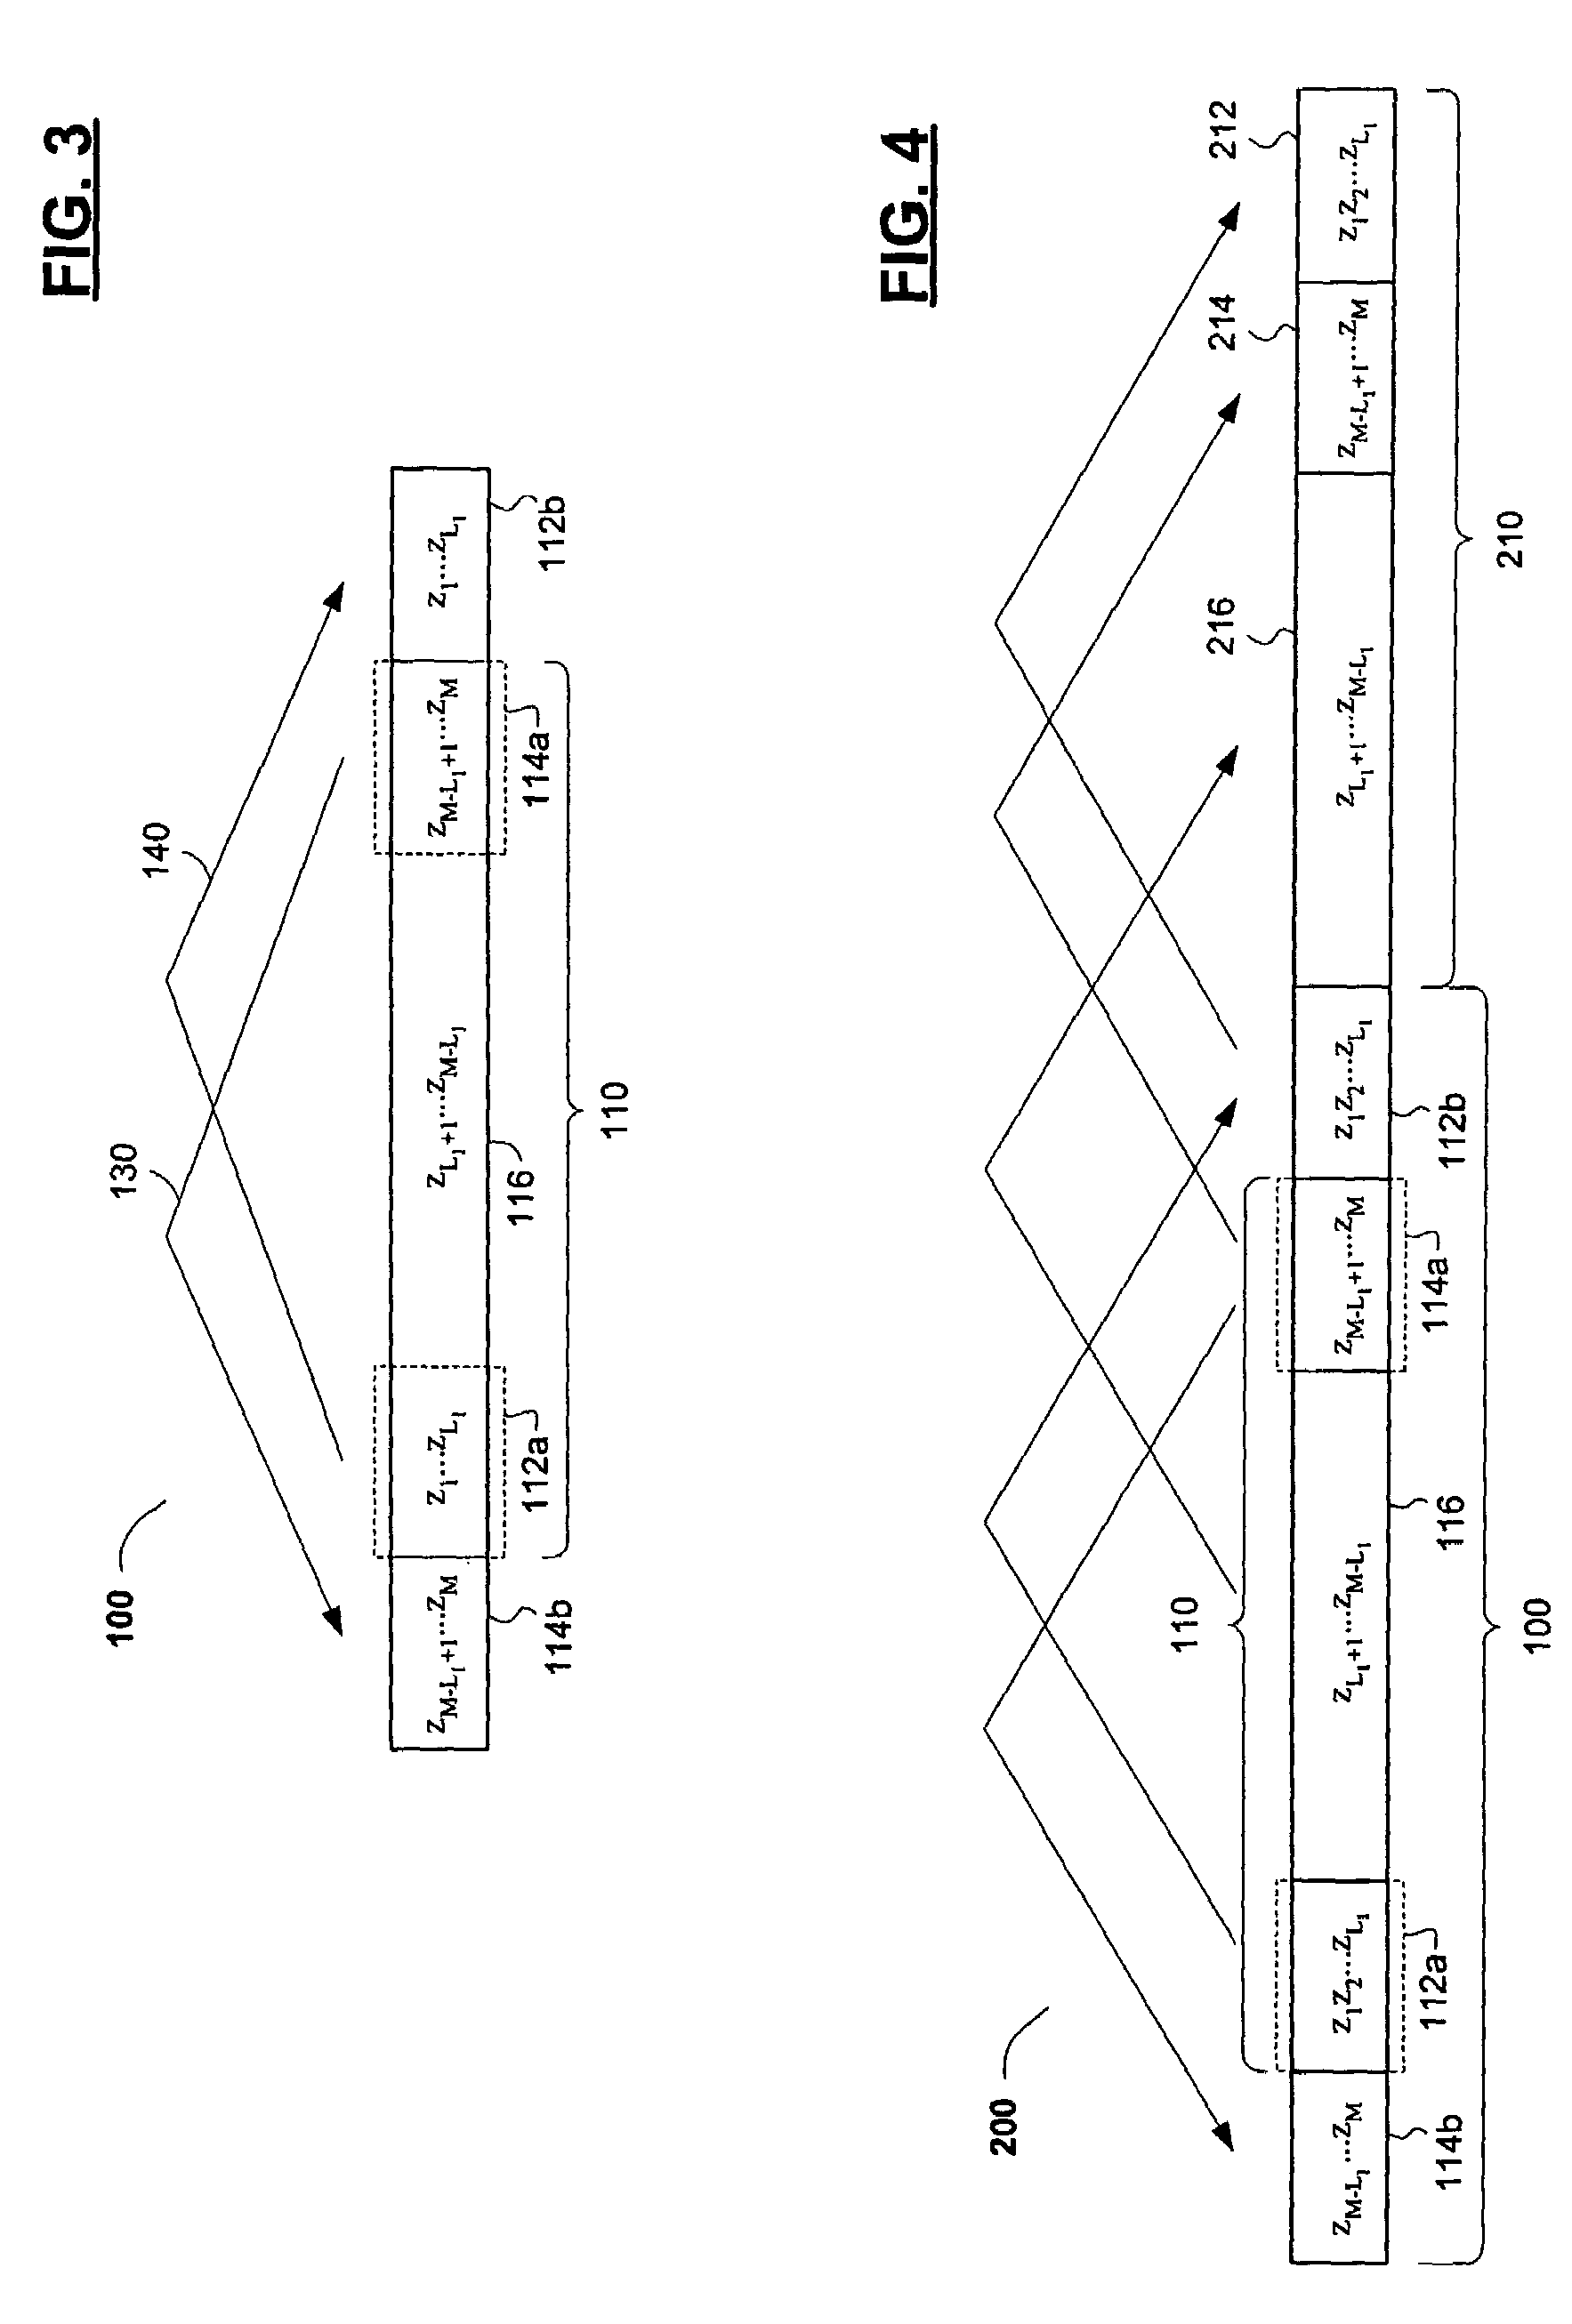 Methods, algorithms, software, circuits, receivers and systems for iteratively decoding a tailbiting convolutional code